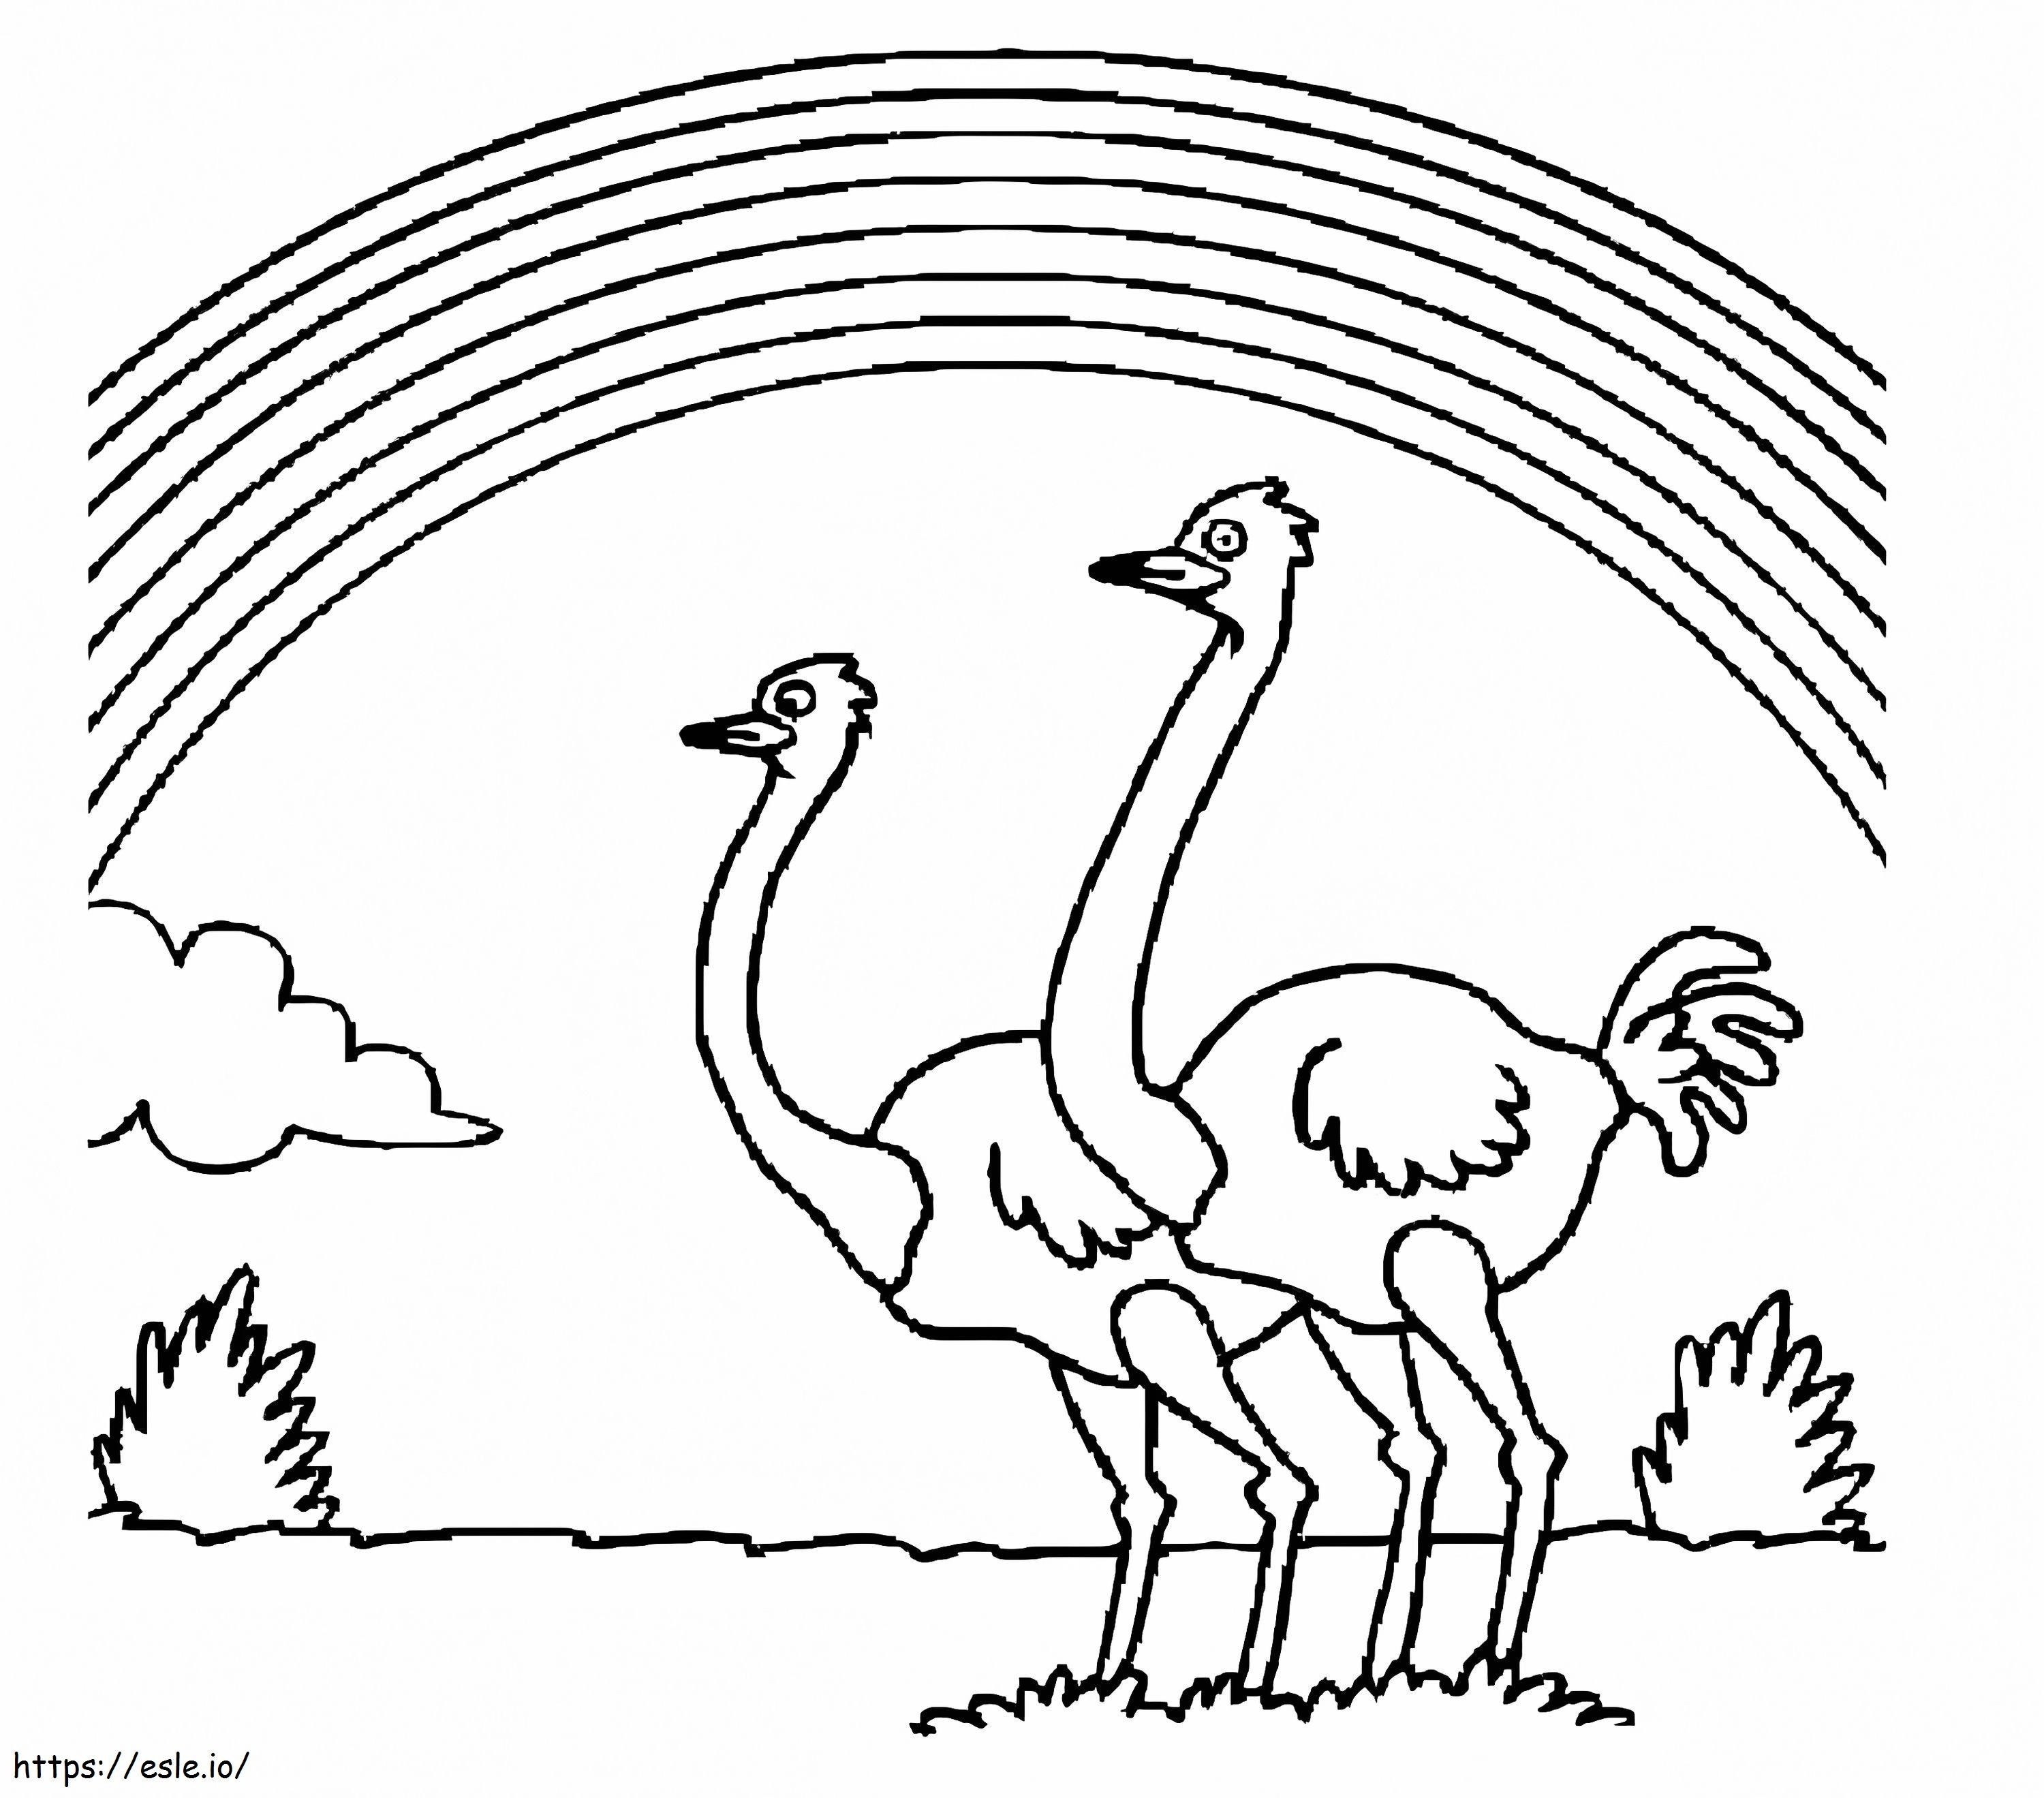 Ostriches And Rainbow coloring page